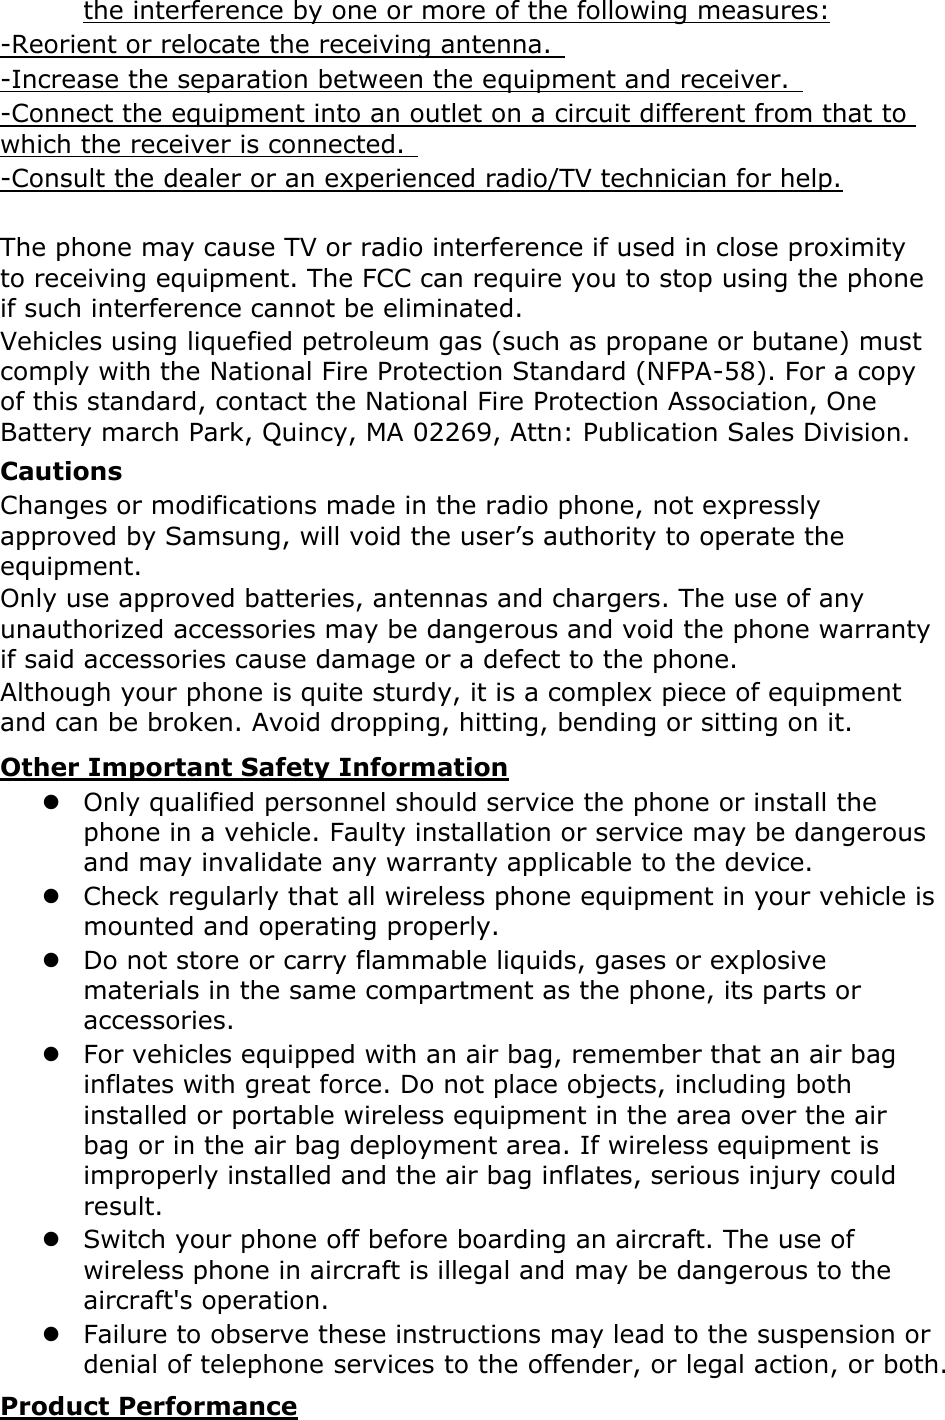 Page 17 of Samsung Electronics Co SGHT259 Cellular/PCS GSM/EDGE and AWS WCDMA Phone with Bluetooth User Manual